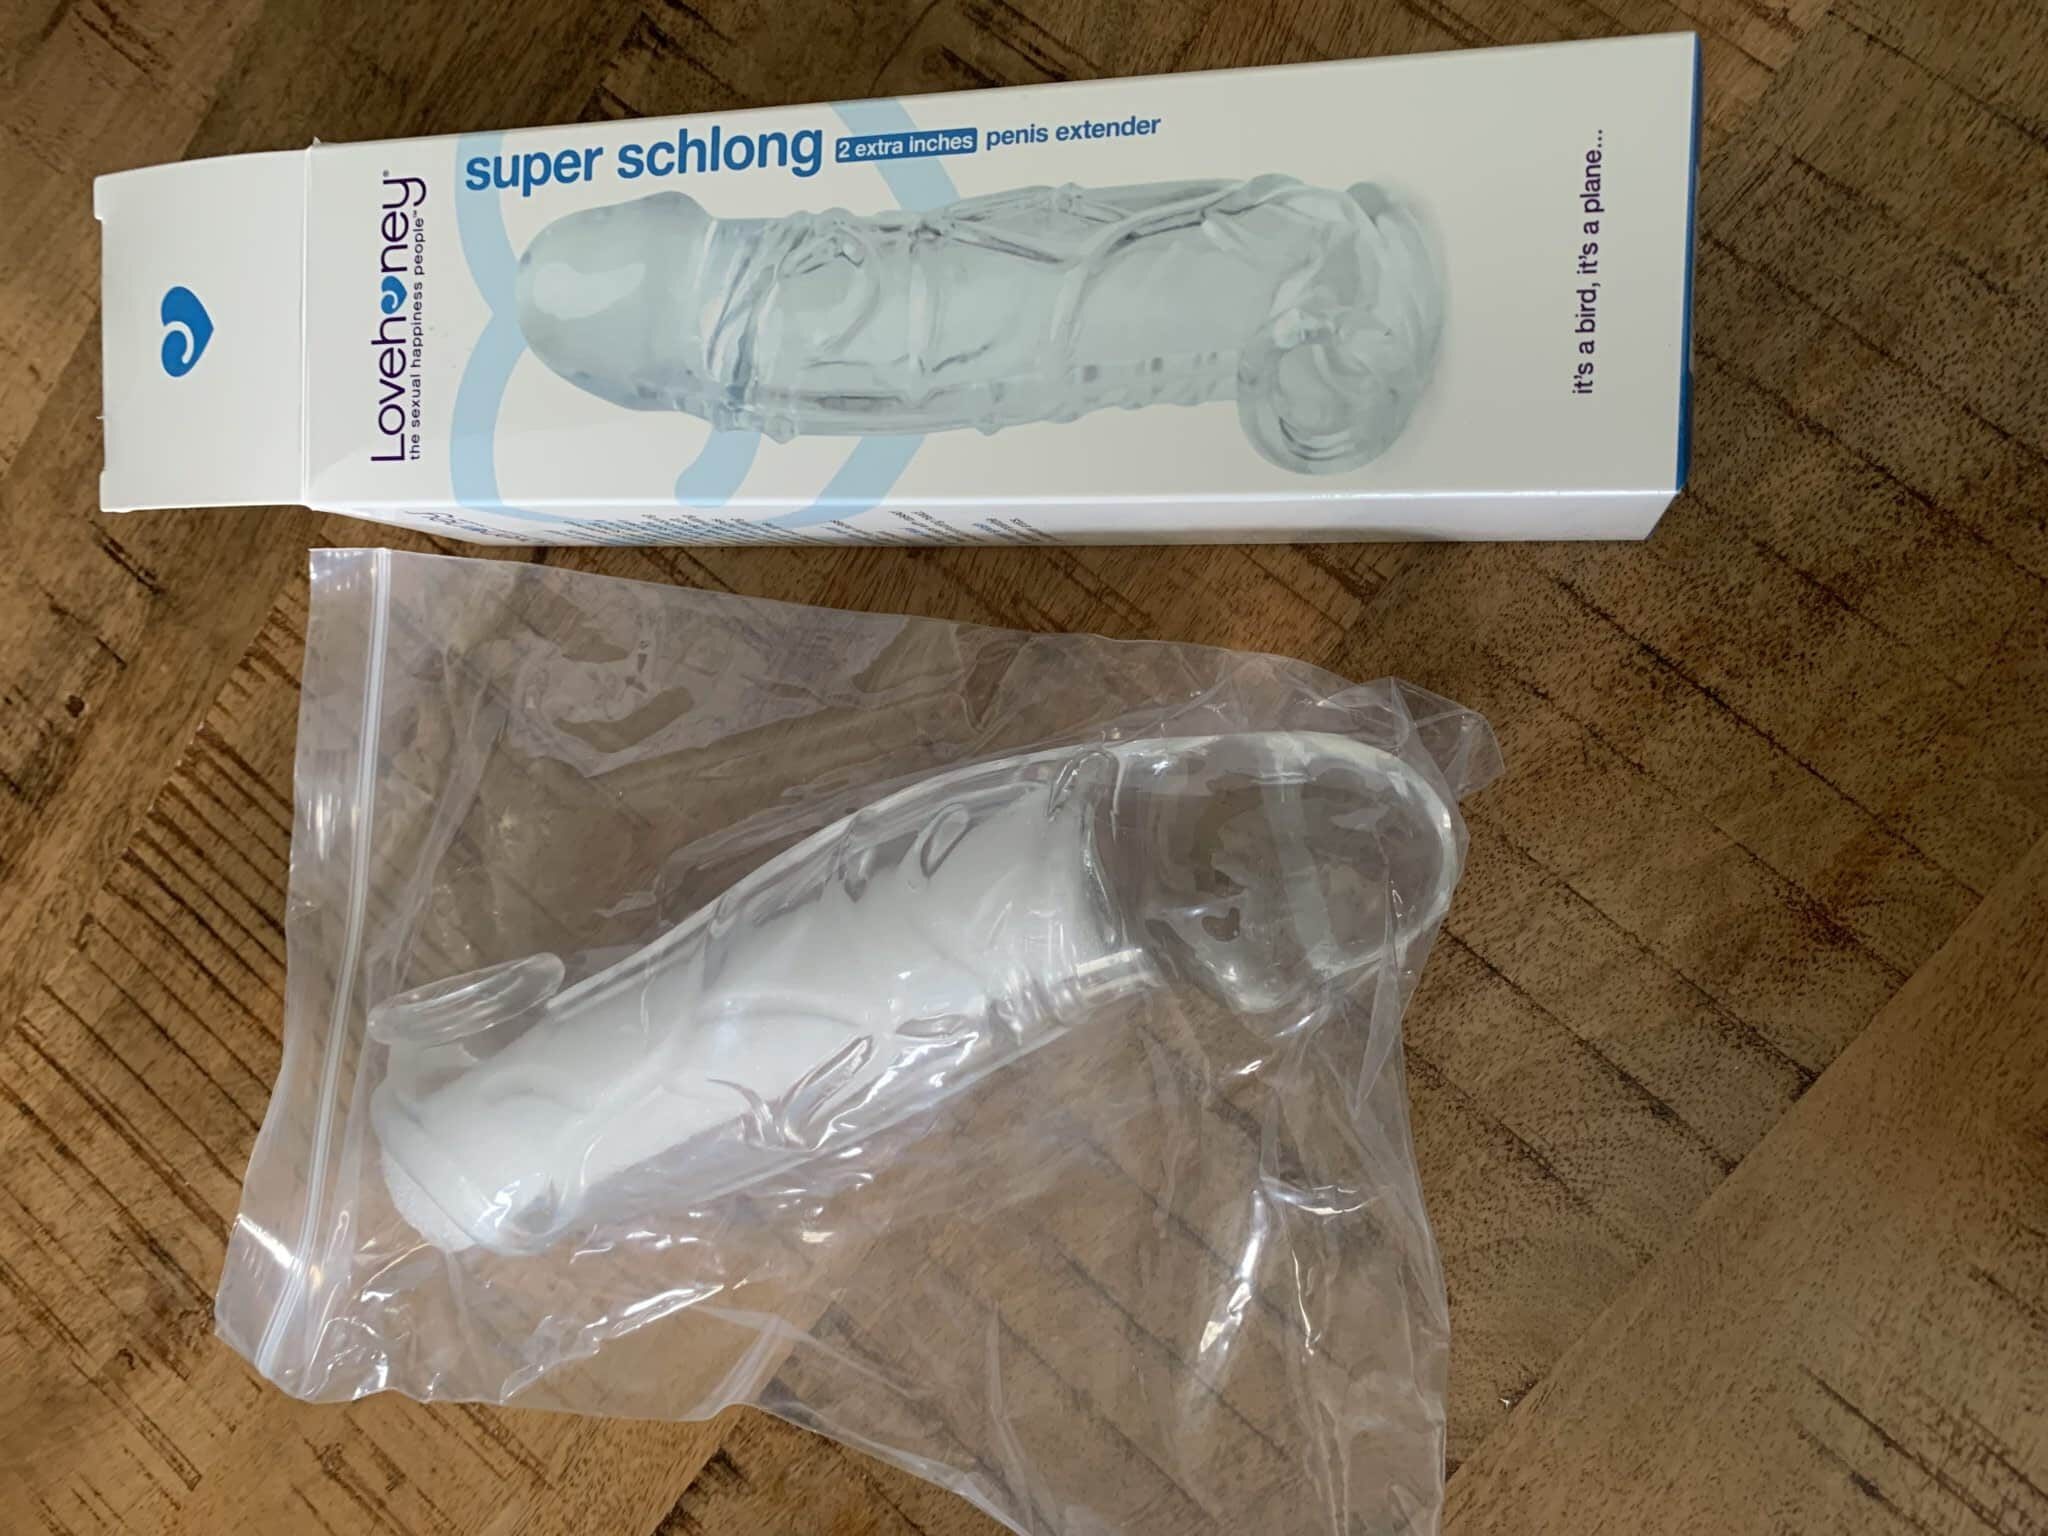 Lovehoney Super Schlong Penis Extender Save or splurge: Looking at the price tag